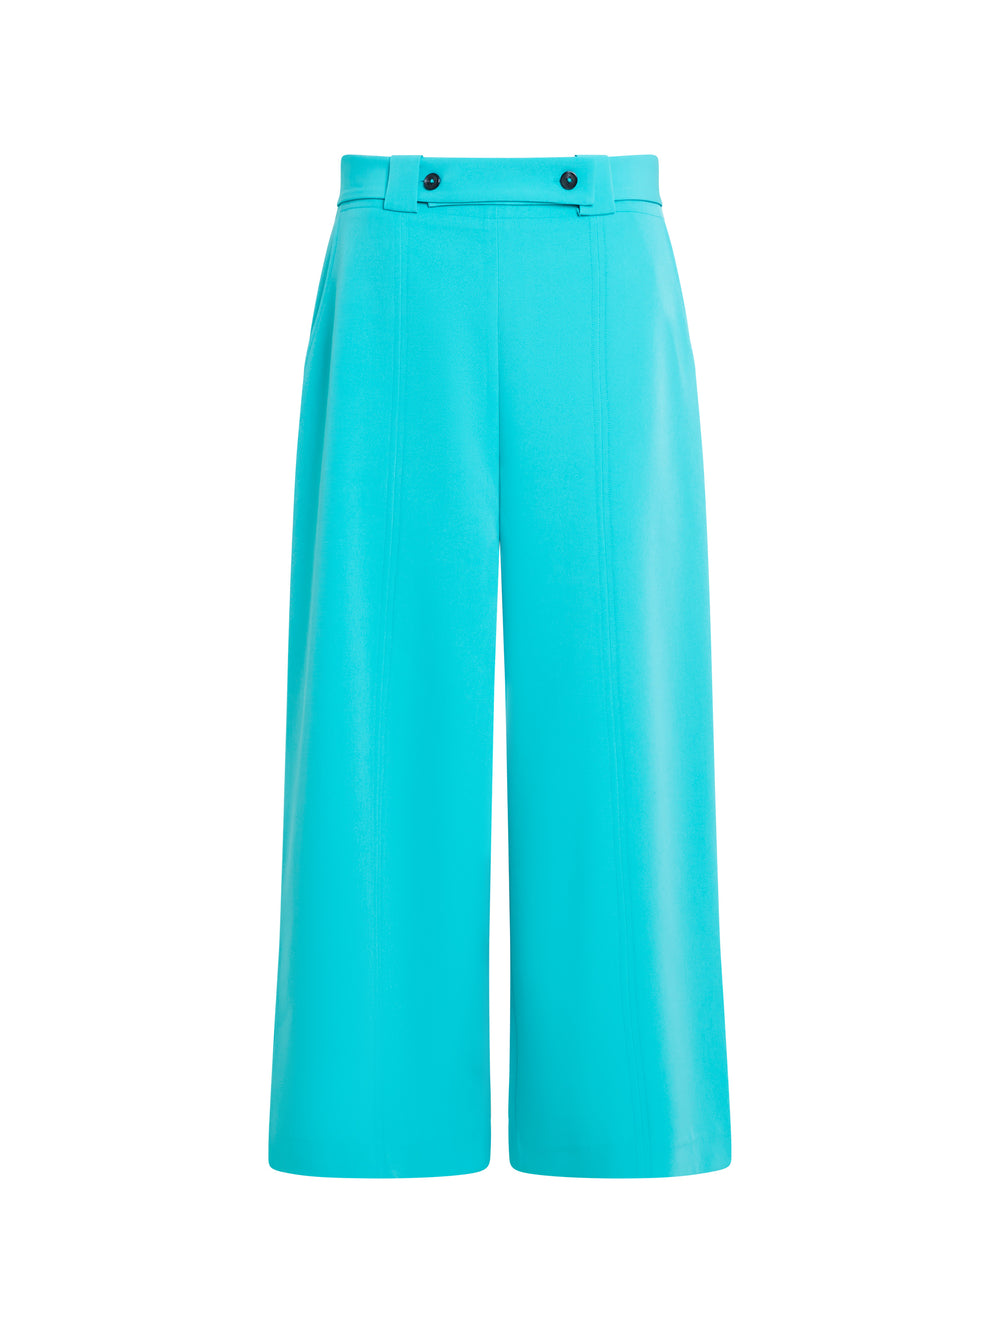 Crepe Women's Stretchy Tapered Fit Salon Trousers, Teal